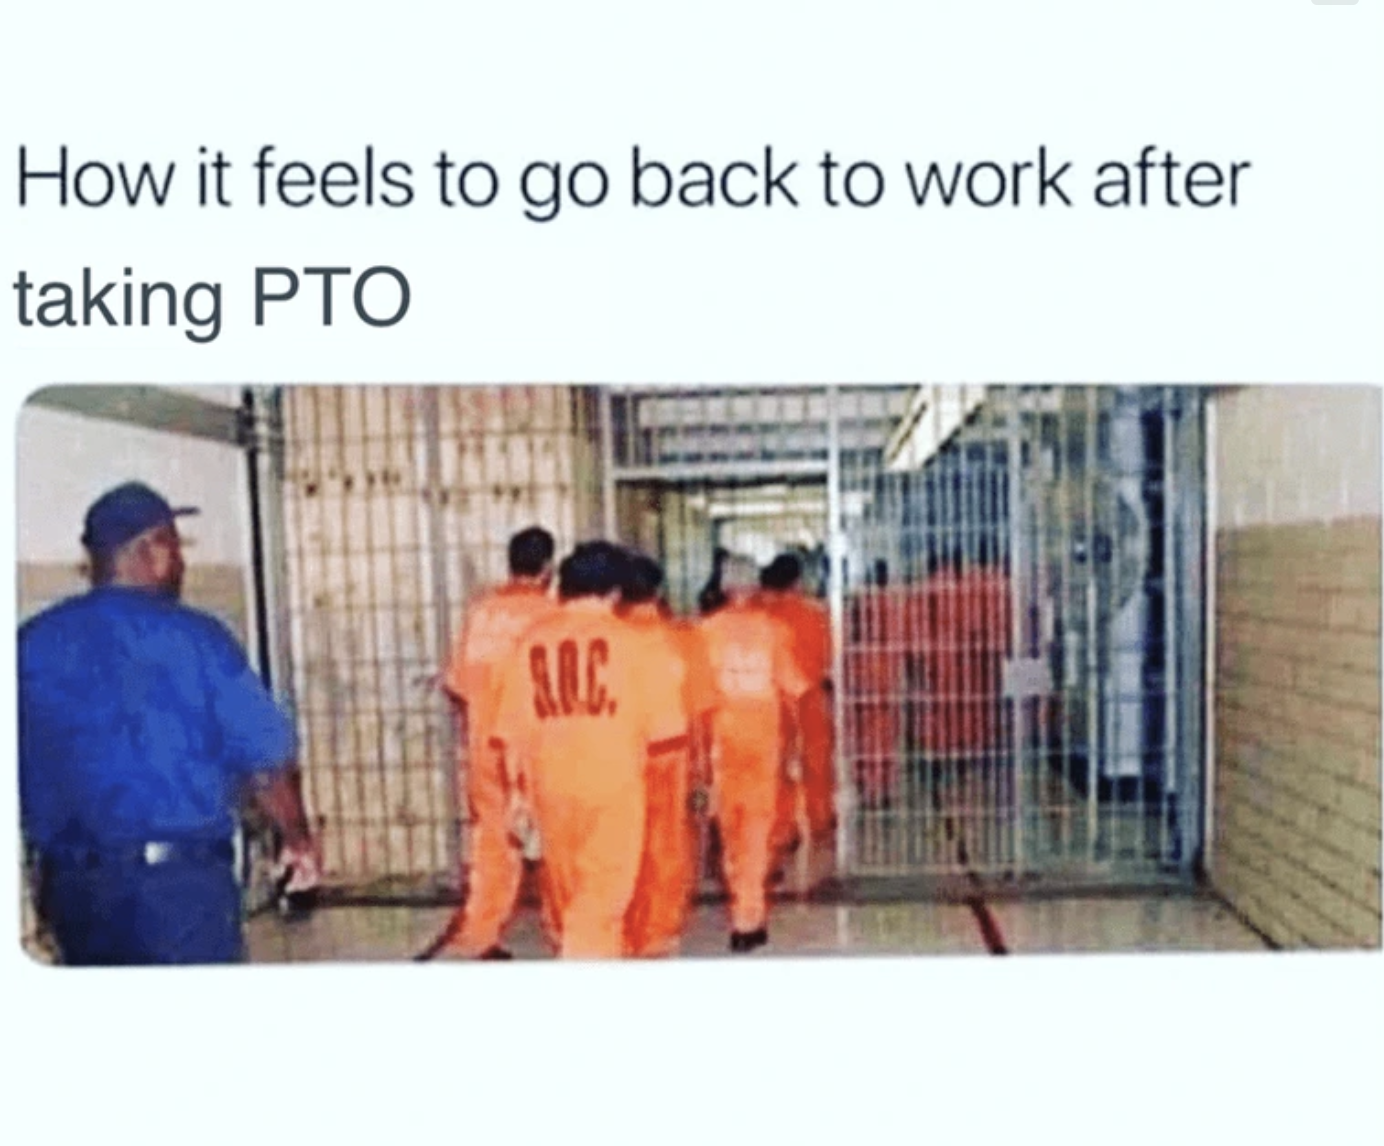 coming back to work after lunch break meme - How it feels to go back to work after taking Pto Soc.